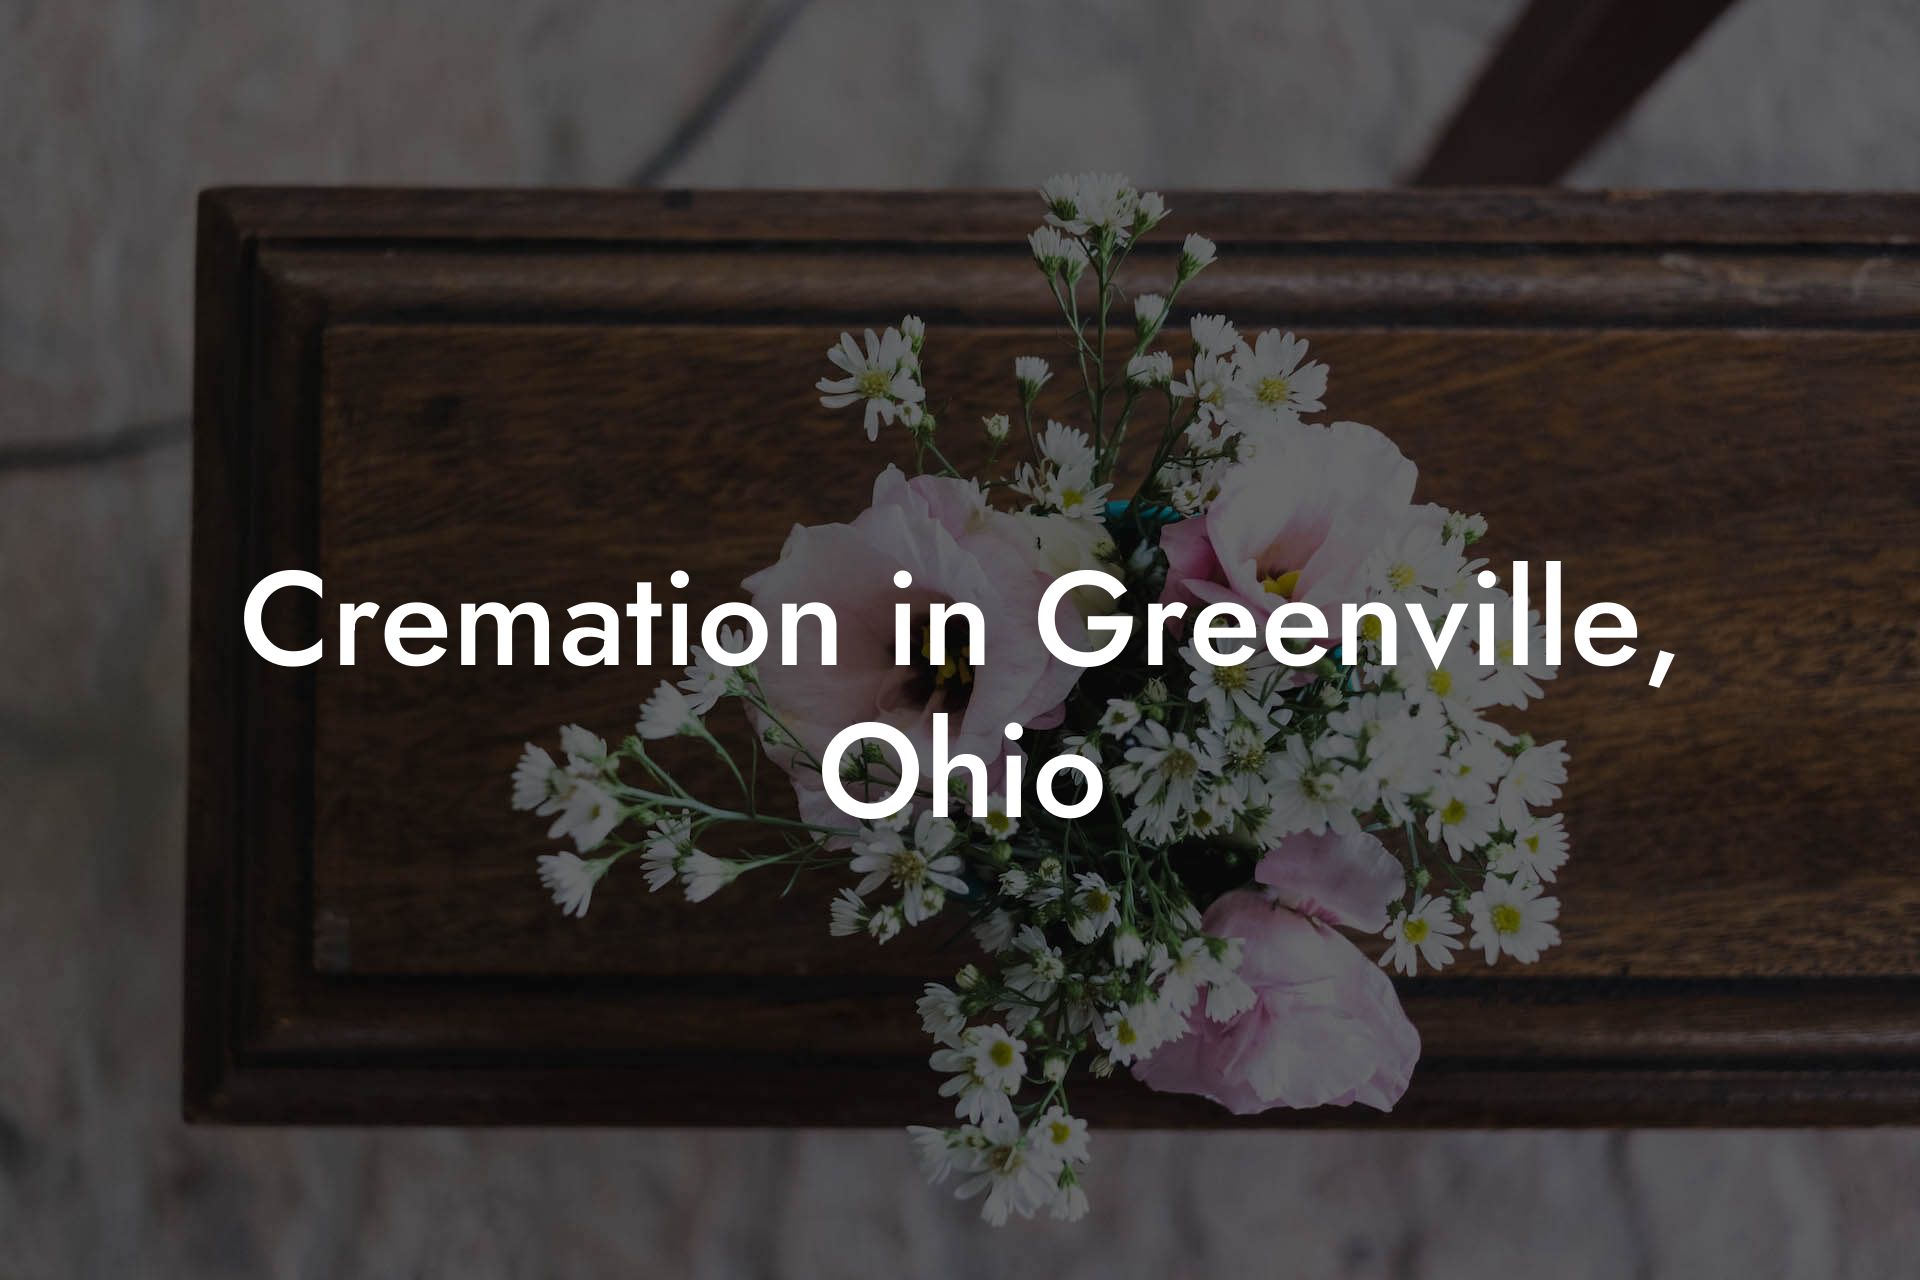 Cremation in Greenville, Ohio